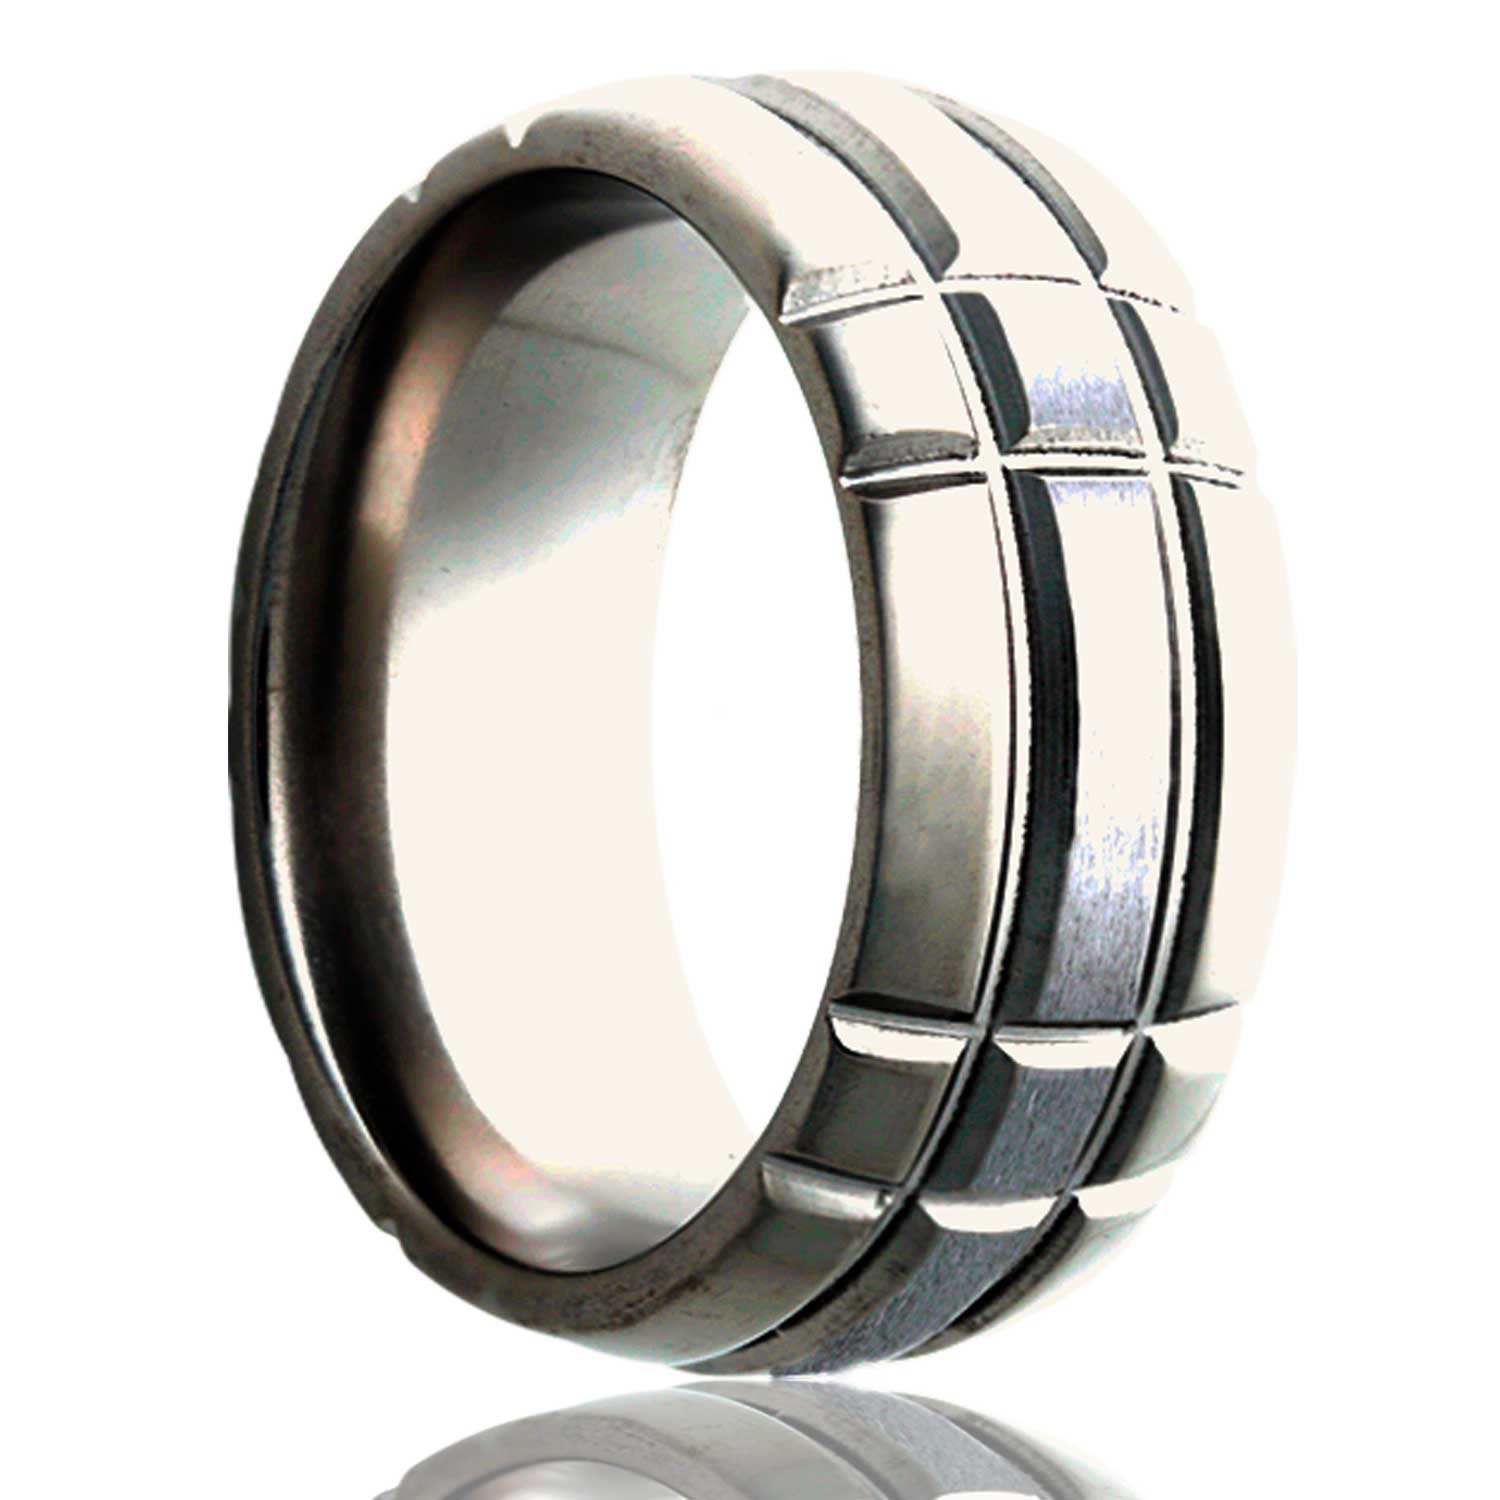 A intersecting grooves domed satin finish titanium wedding band displayed on a neutral white background.